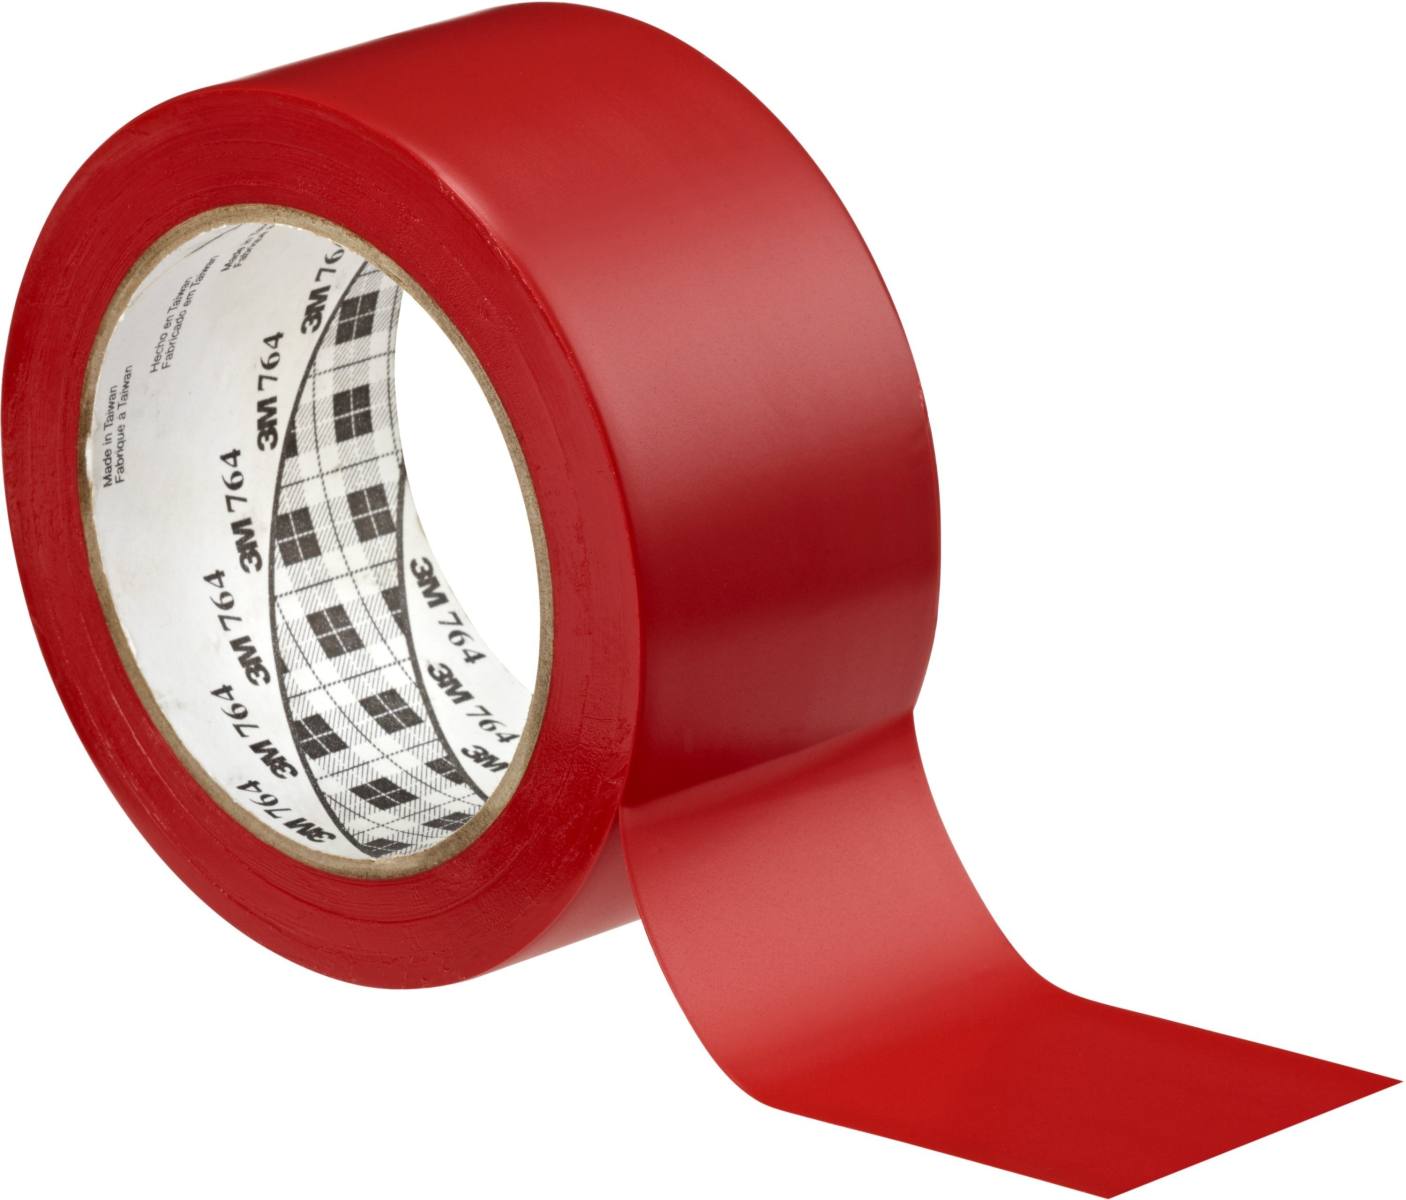 3M All-purpose PVC adhesive tape 764, red, 50 mm x 33 m, individually packed for convenience